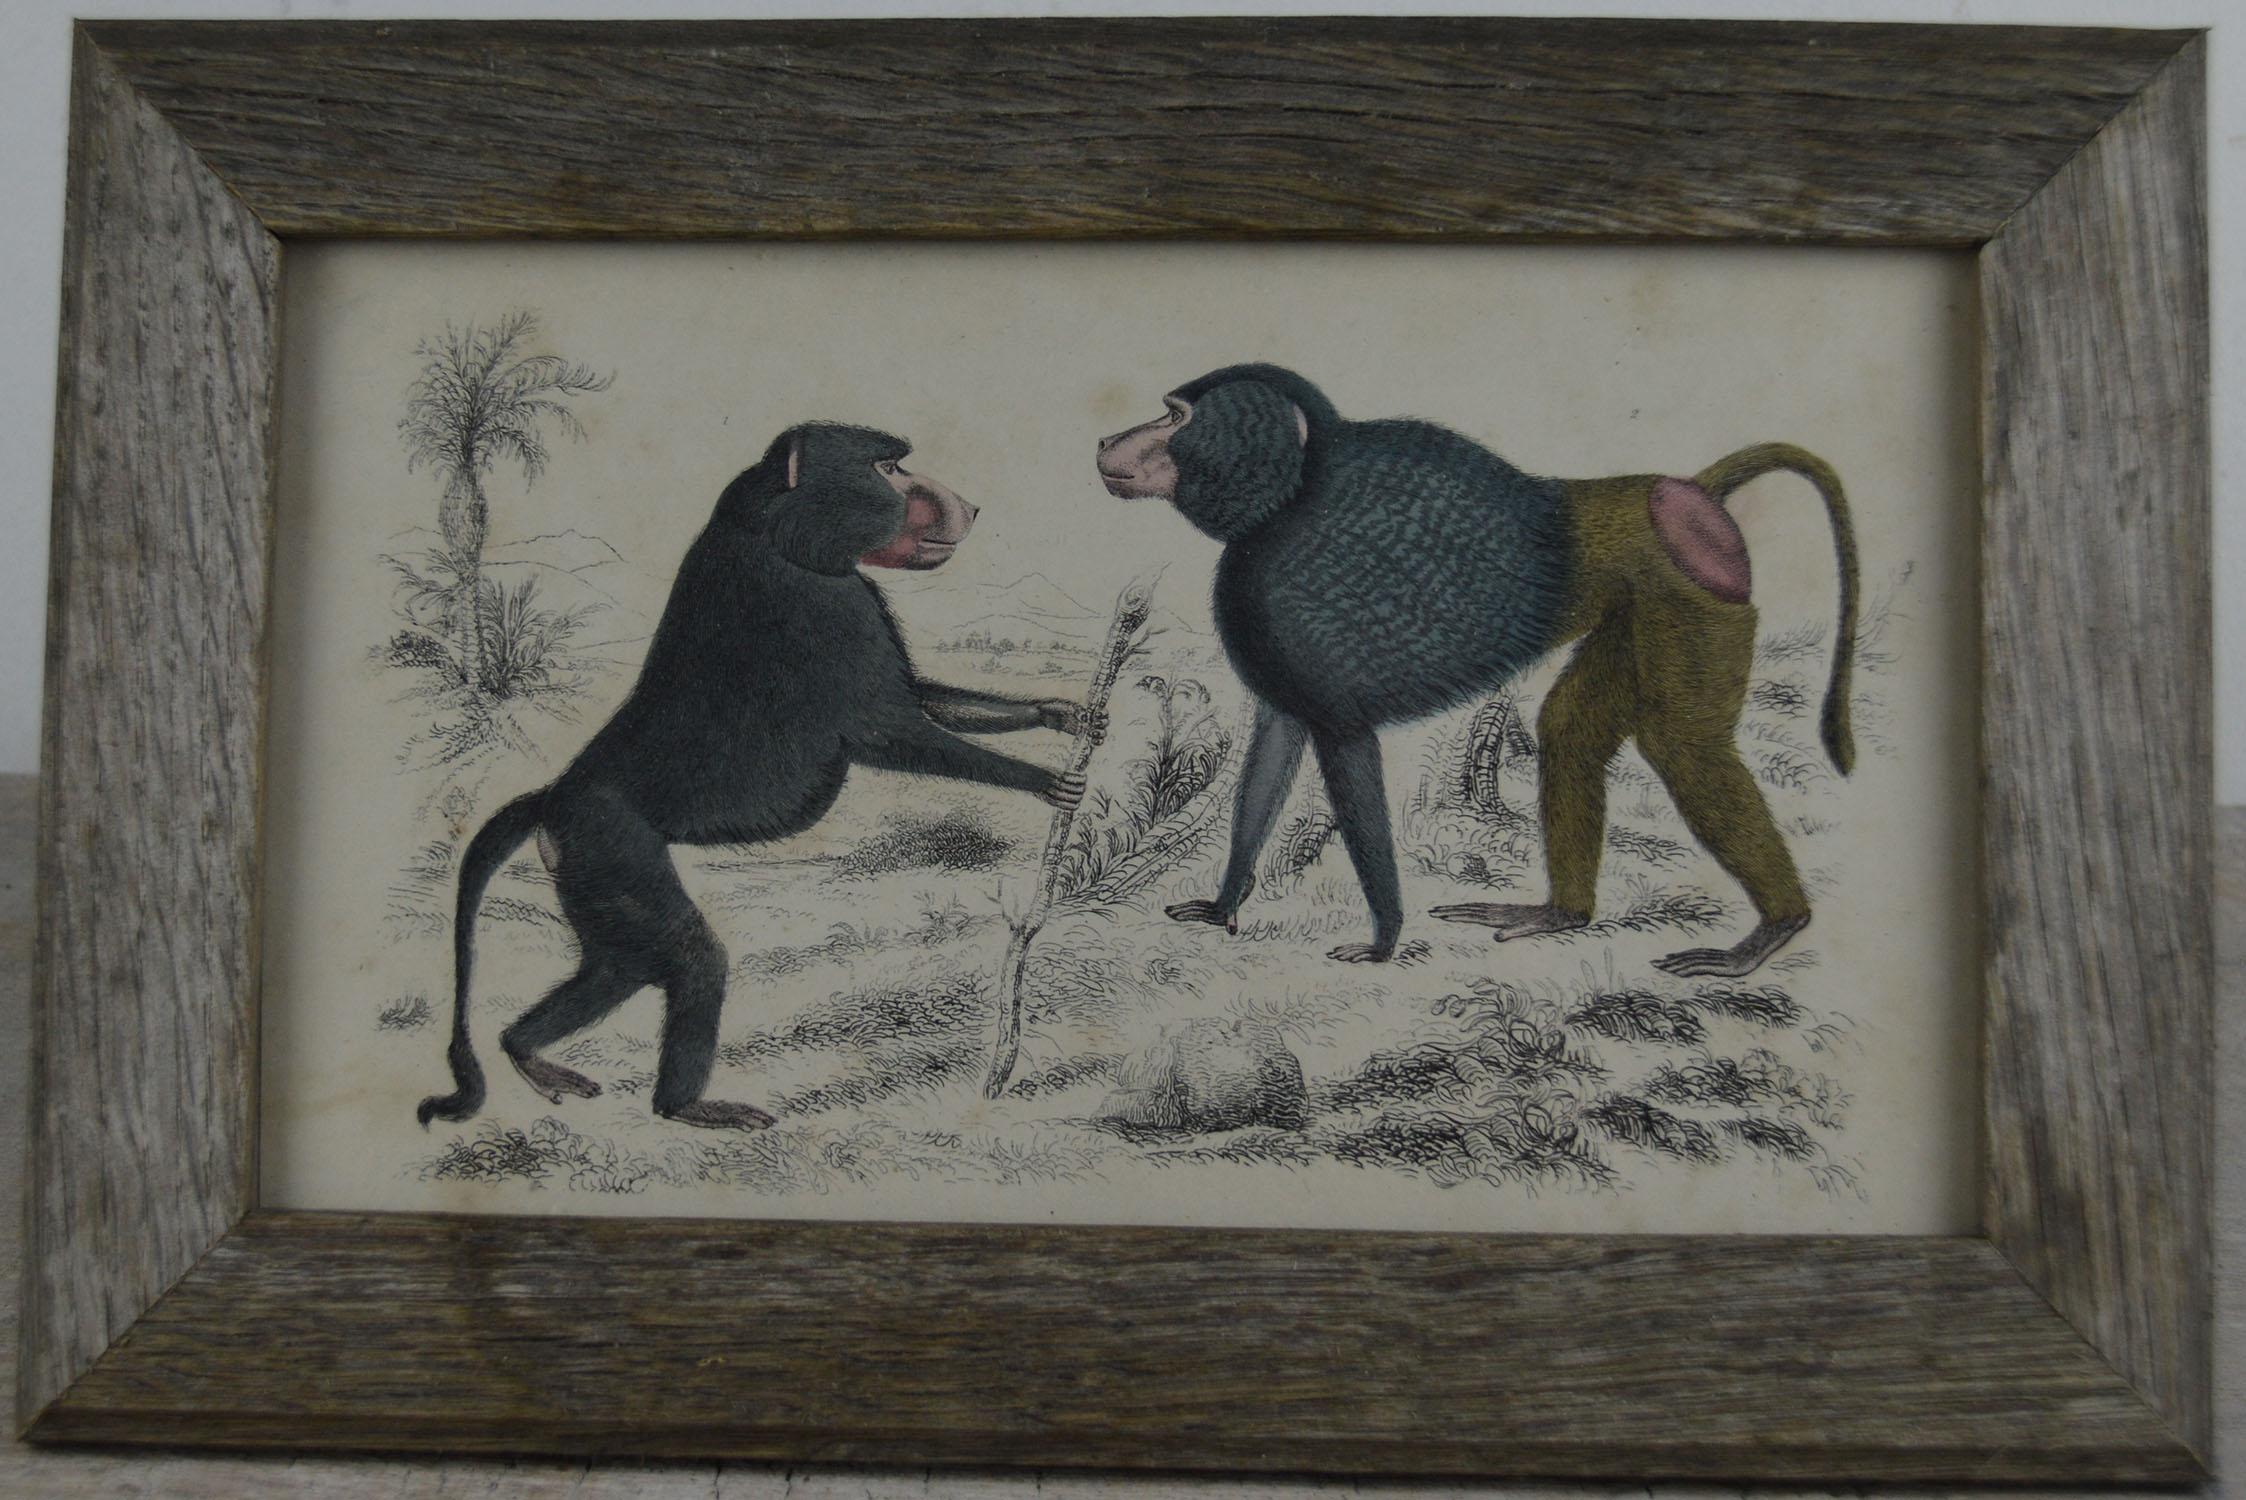 Great image of monkeys presented in an antique distressed oak frame.

Original hand colored lithograph after Cpt. Brown.

Published by Fullerton, 1847.

Free shipping.

   